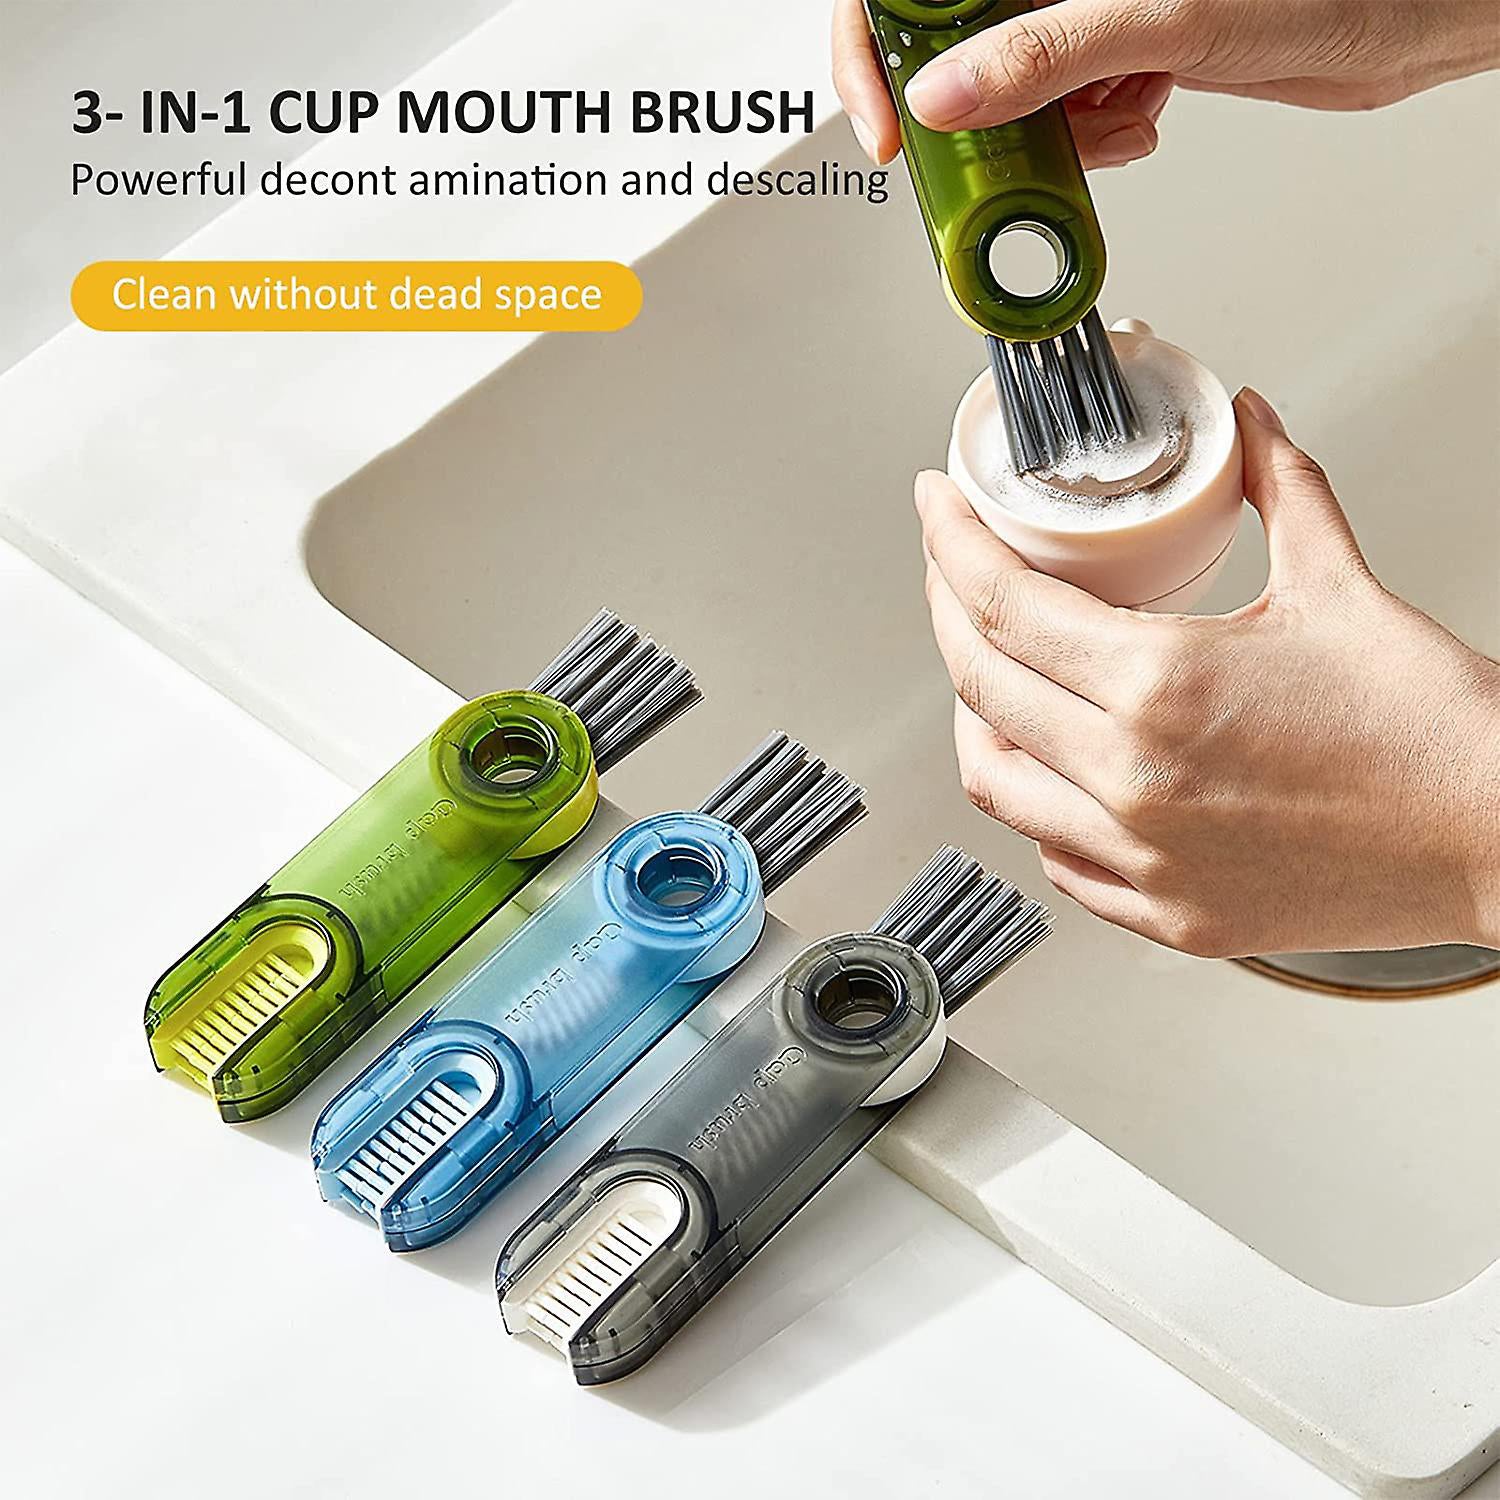 12687 3in1 Multifunctional Cleaning Brush, Bottle Cleaning Brush, Cup Cleaner Brush, for Bottle Cup Cover Lid Home Kitchen Cleaning Tool (1 Pc)